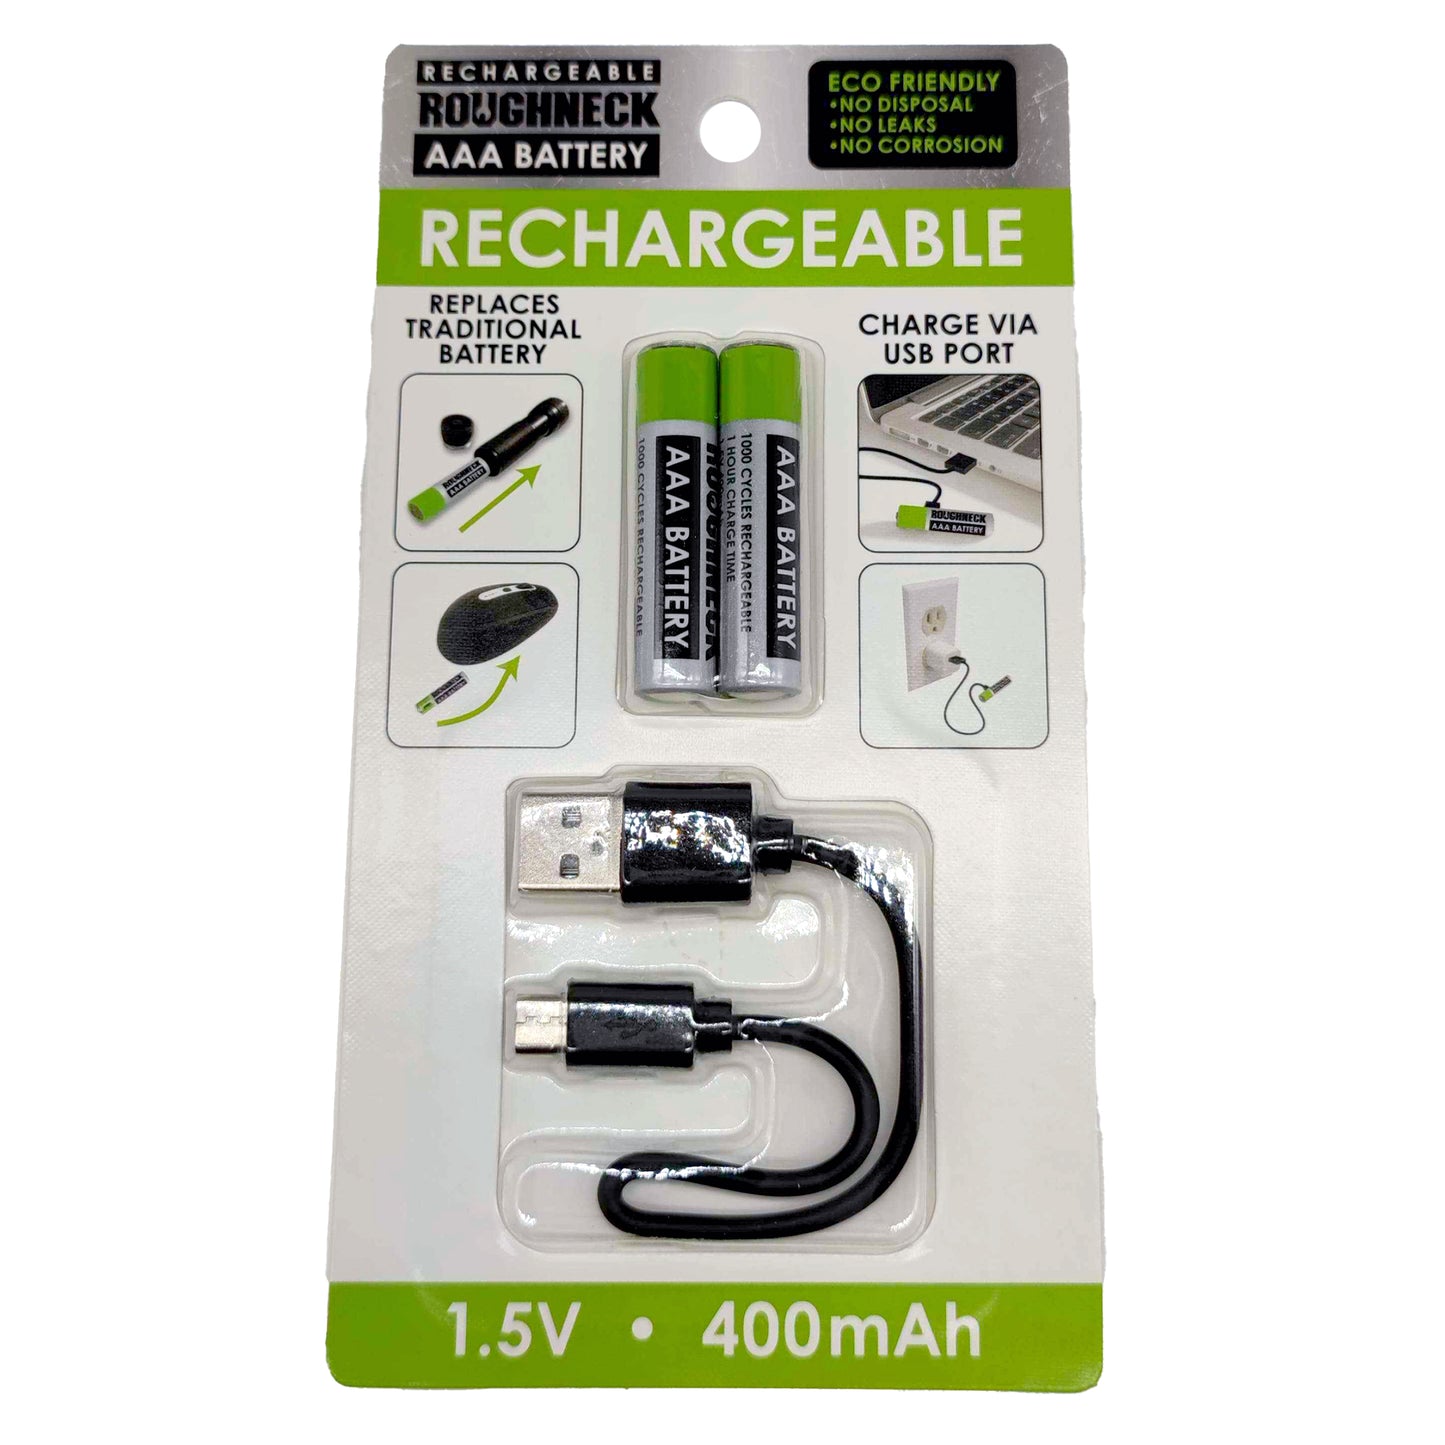 ITEM NUMBER 022702L RECHARGEABLE AAA BATTERY - STORE SURPLUS NO DISPLAY 12 PIECES PER PACK